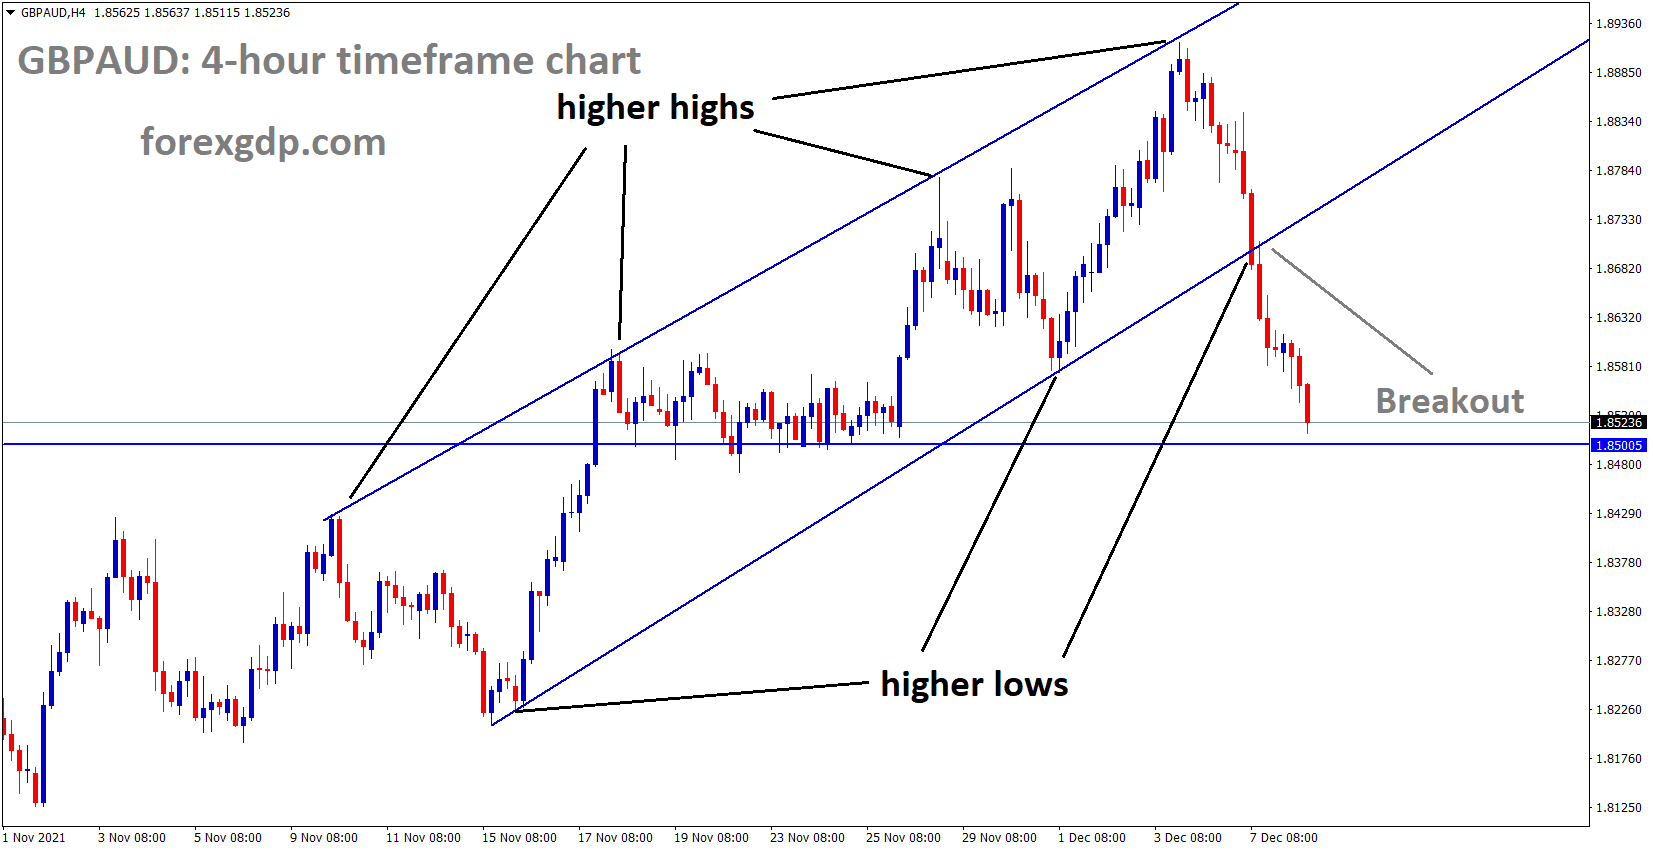 GBPAUD has broken the ascending channel and the market has reached near the horizontal support area.